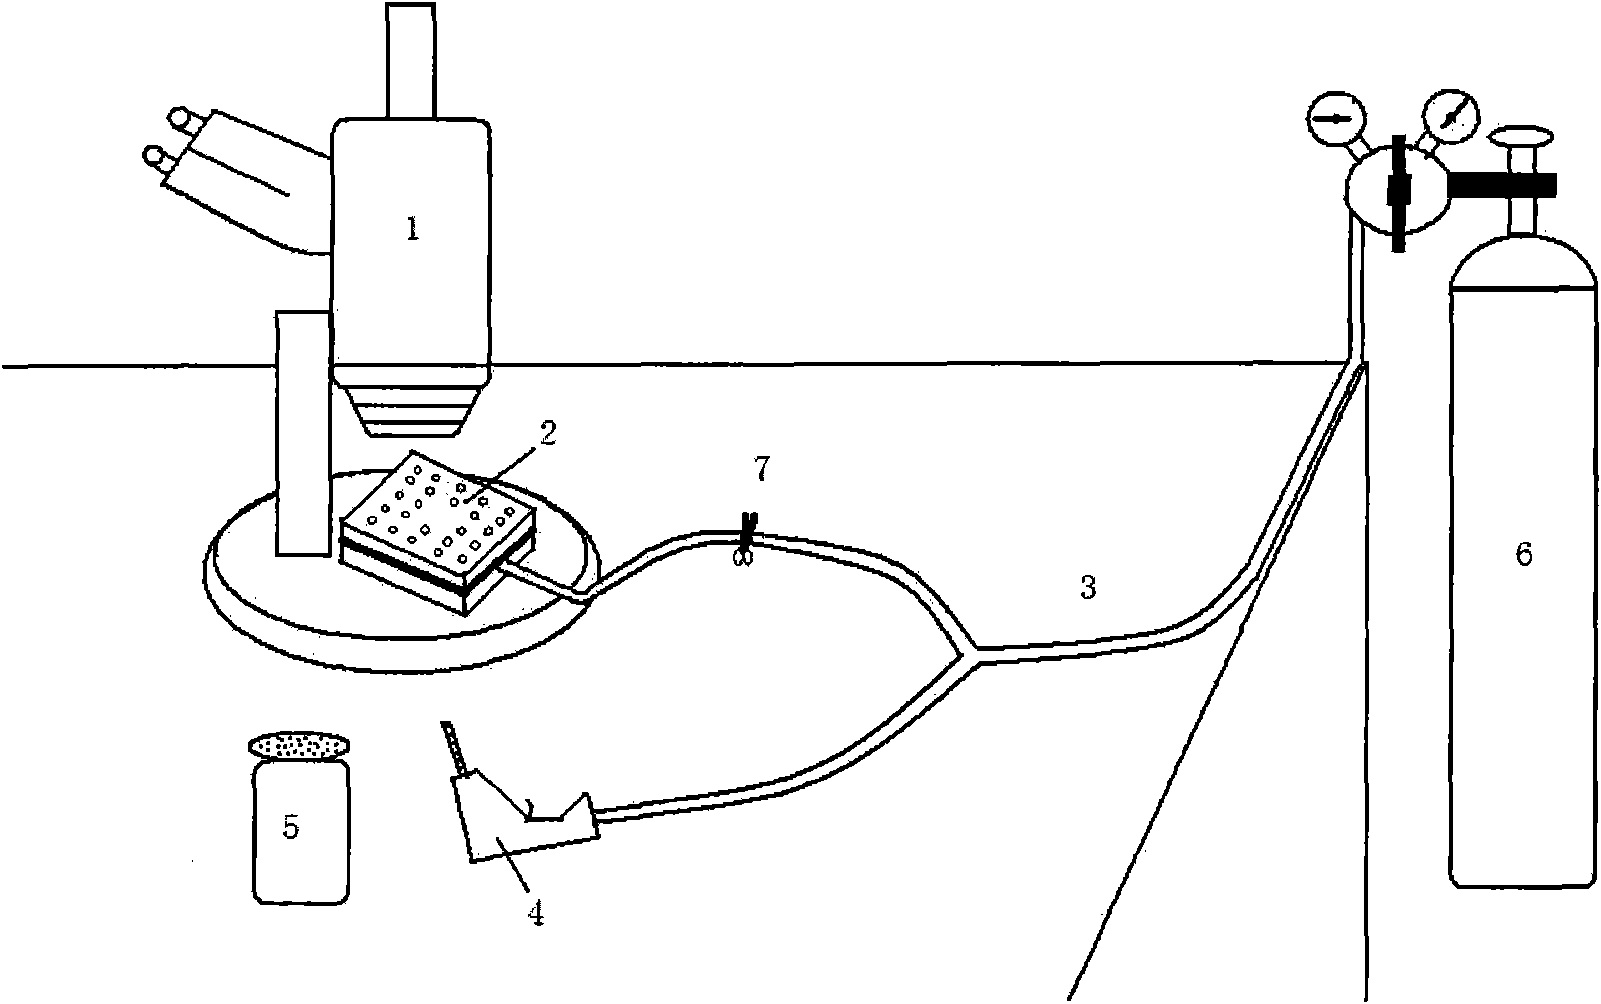 Operating device for anaesthetizing active insects